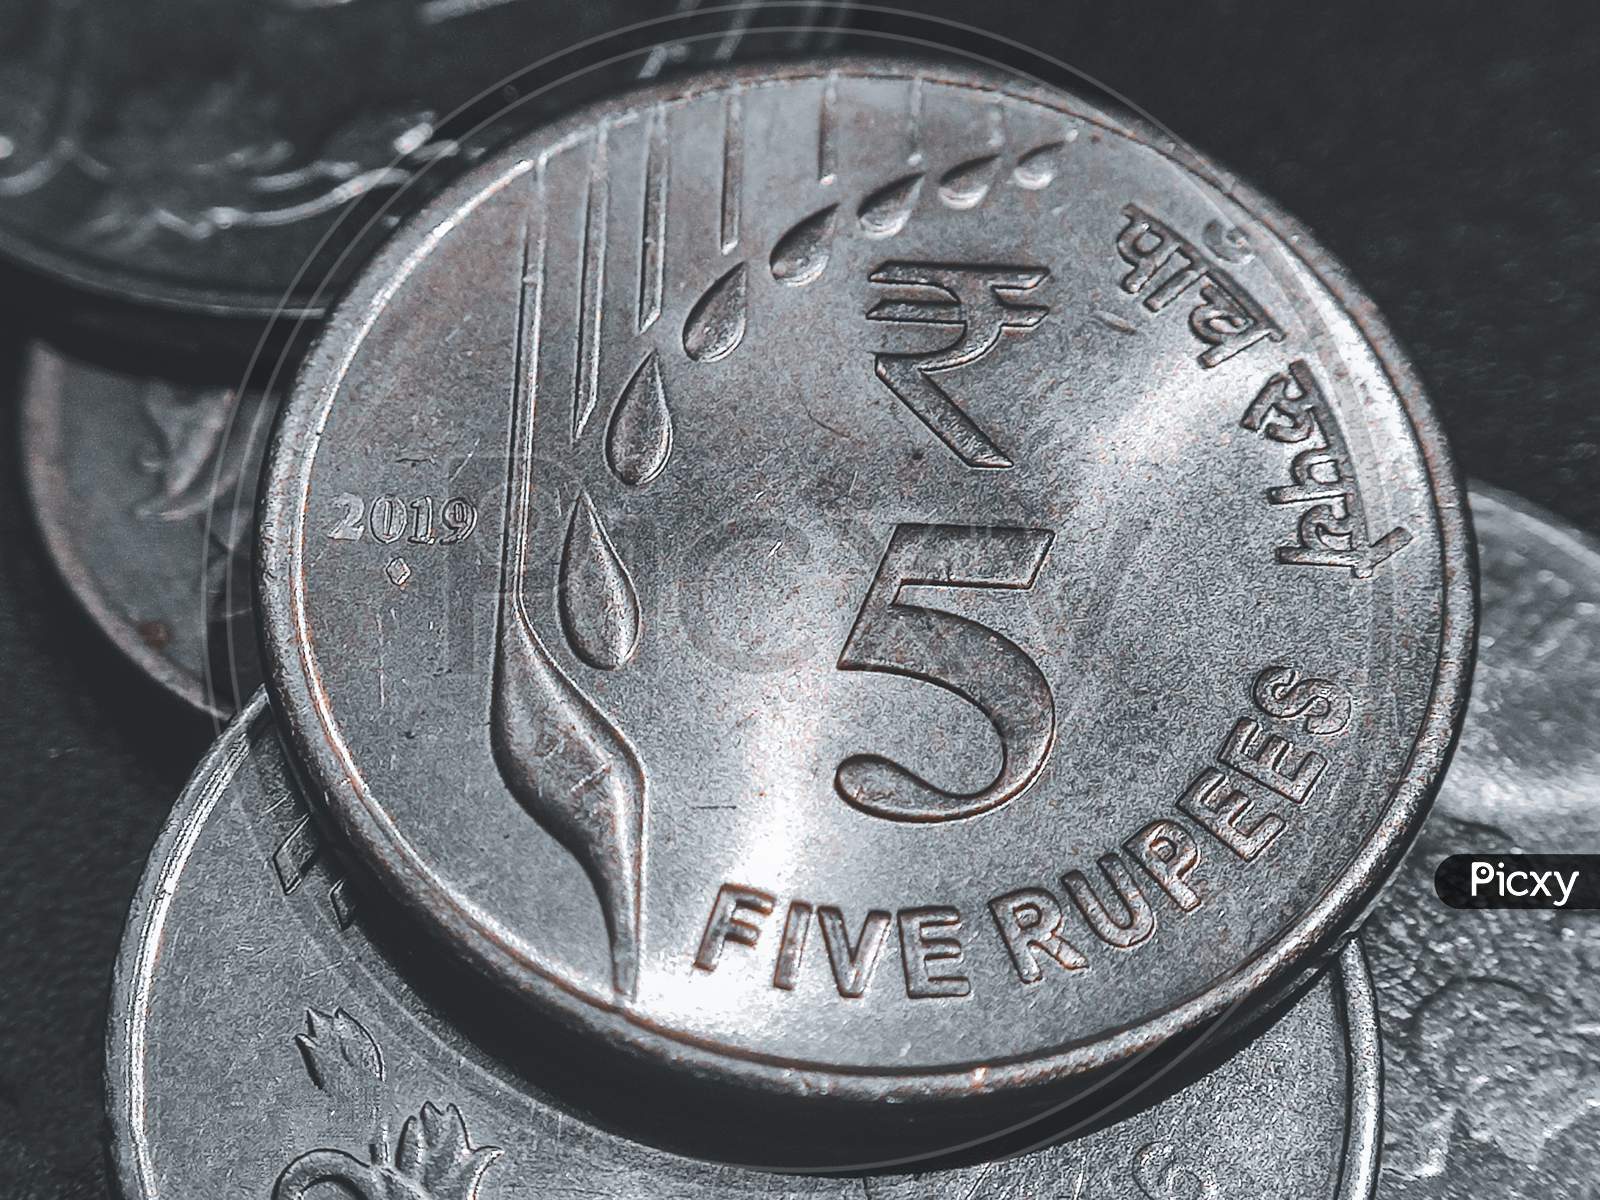 Case up shot of 5 rupee coin